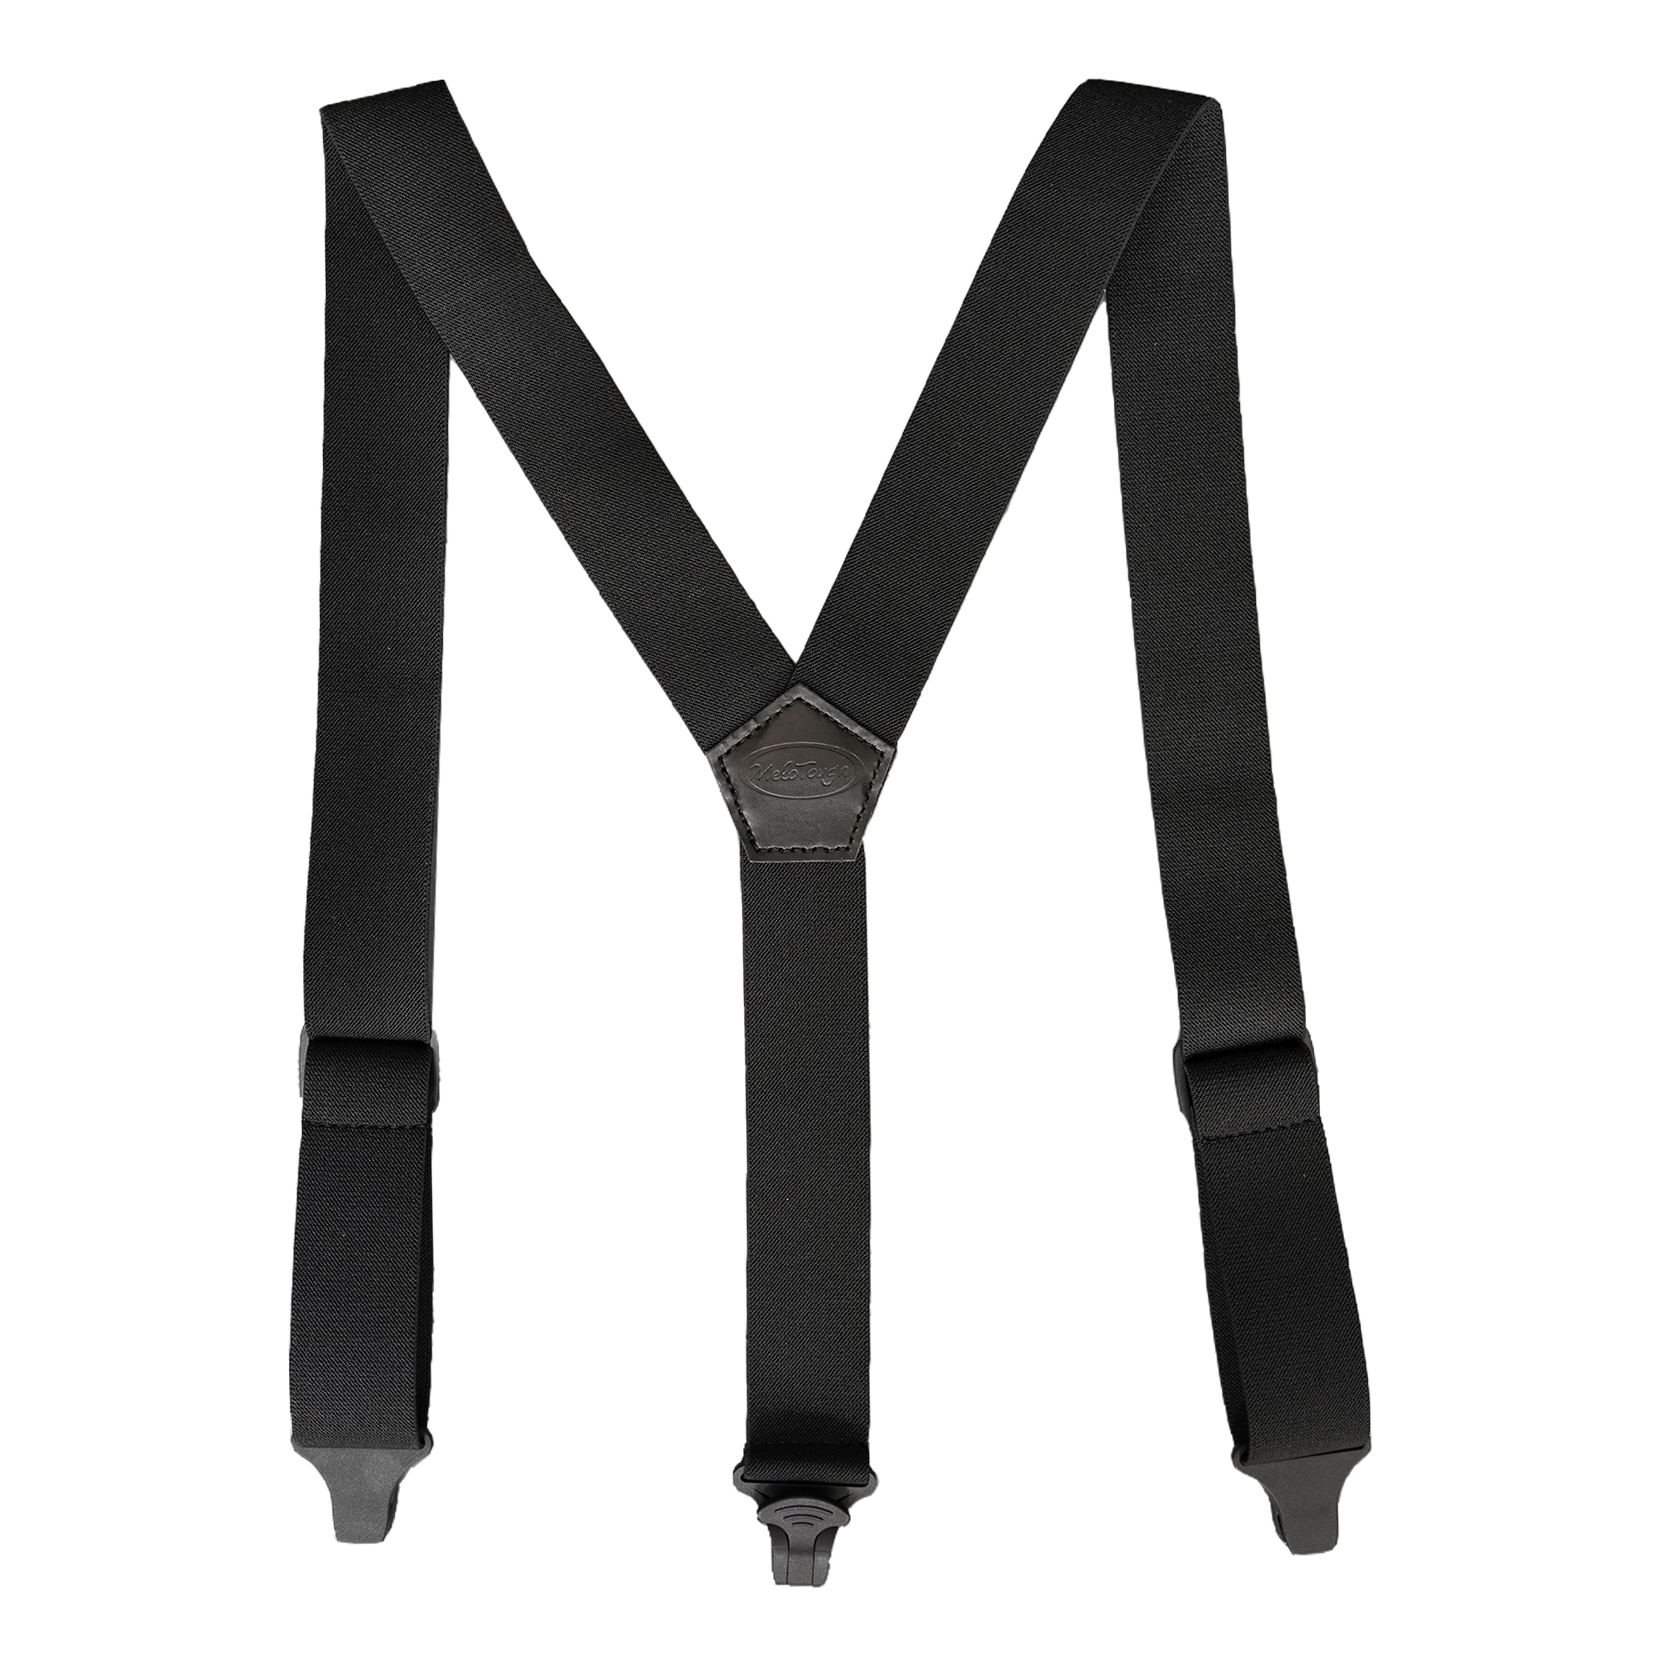 Back Suspenders Airport Friendly Suspenders,NO Buzz with Plastic Clip 1.5 Inch Fully Elastic Braces